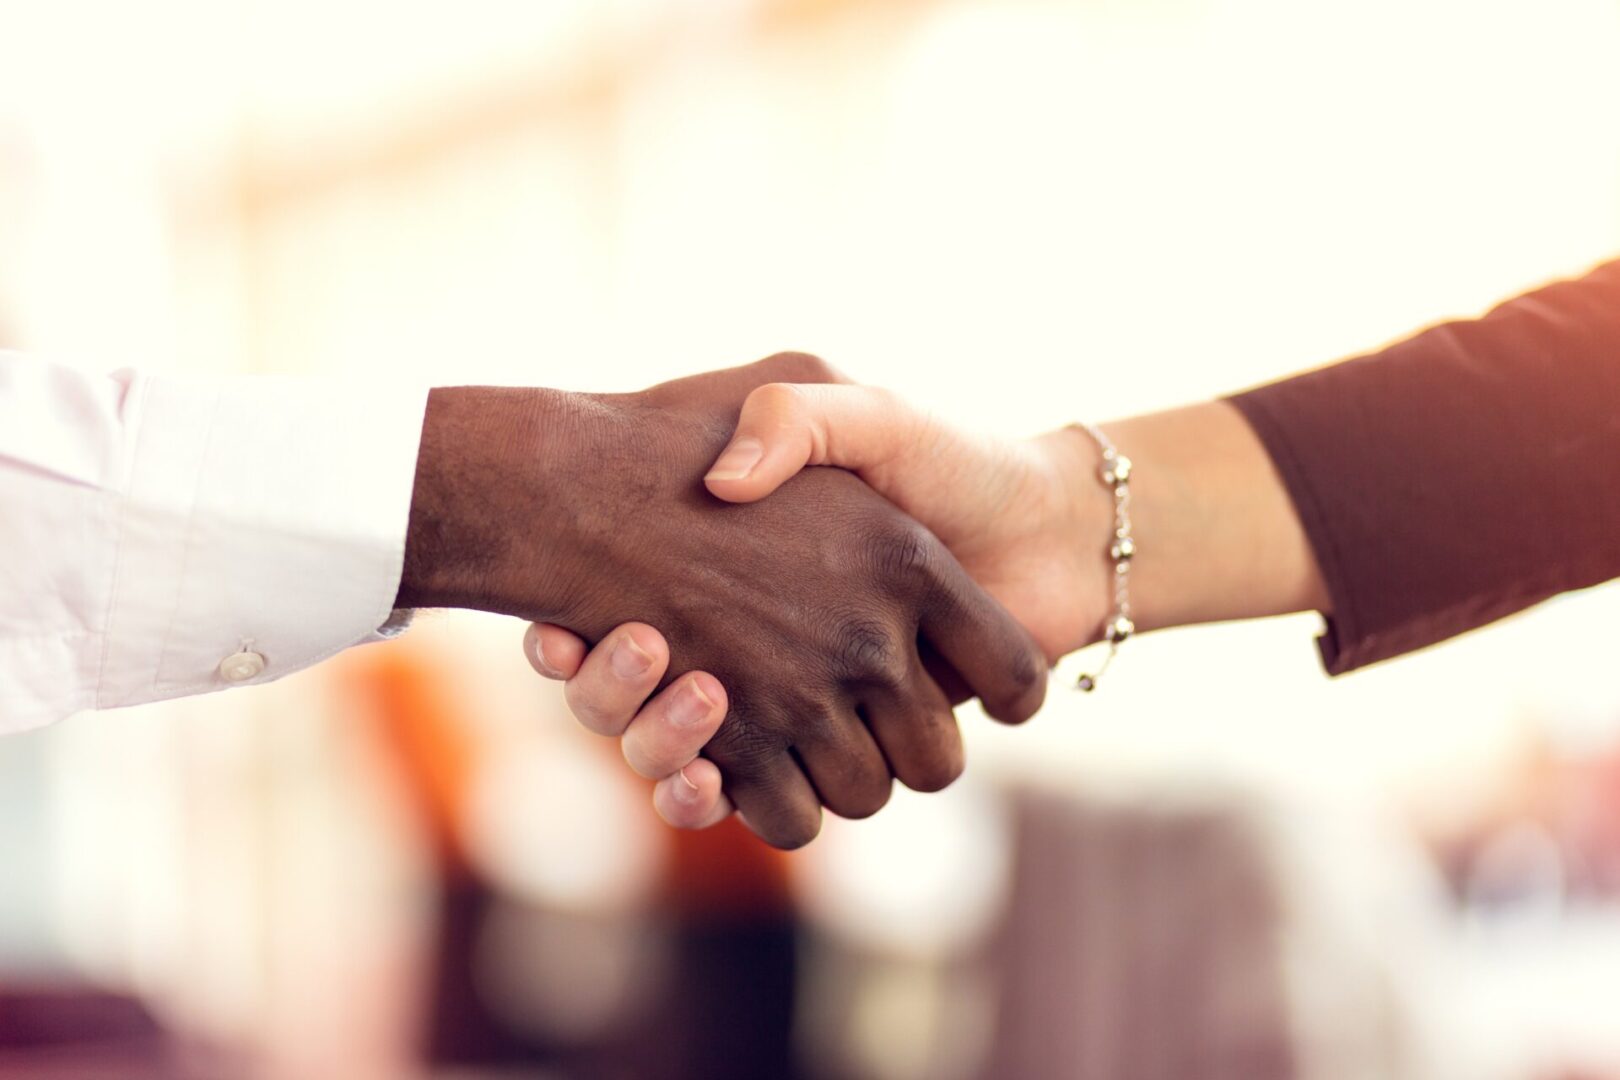 handshake illustrating idea of how to find a literary agent who will make a good partner for you